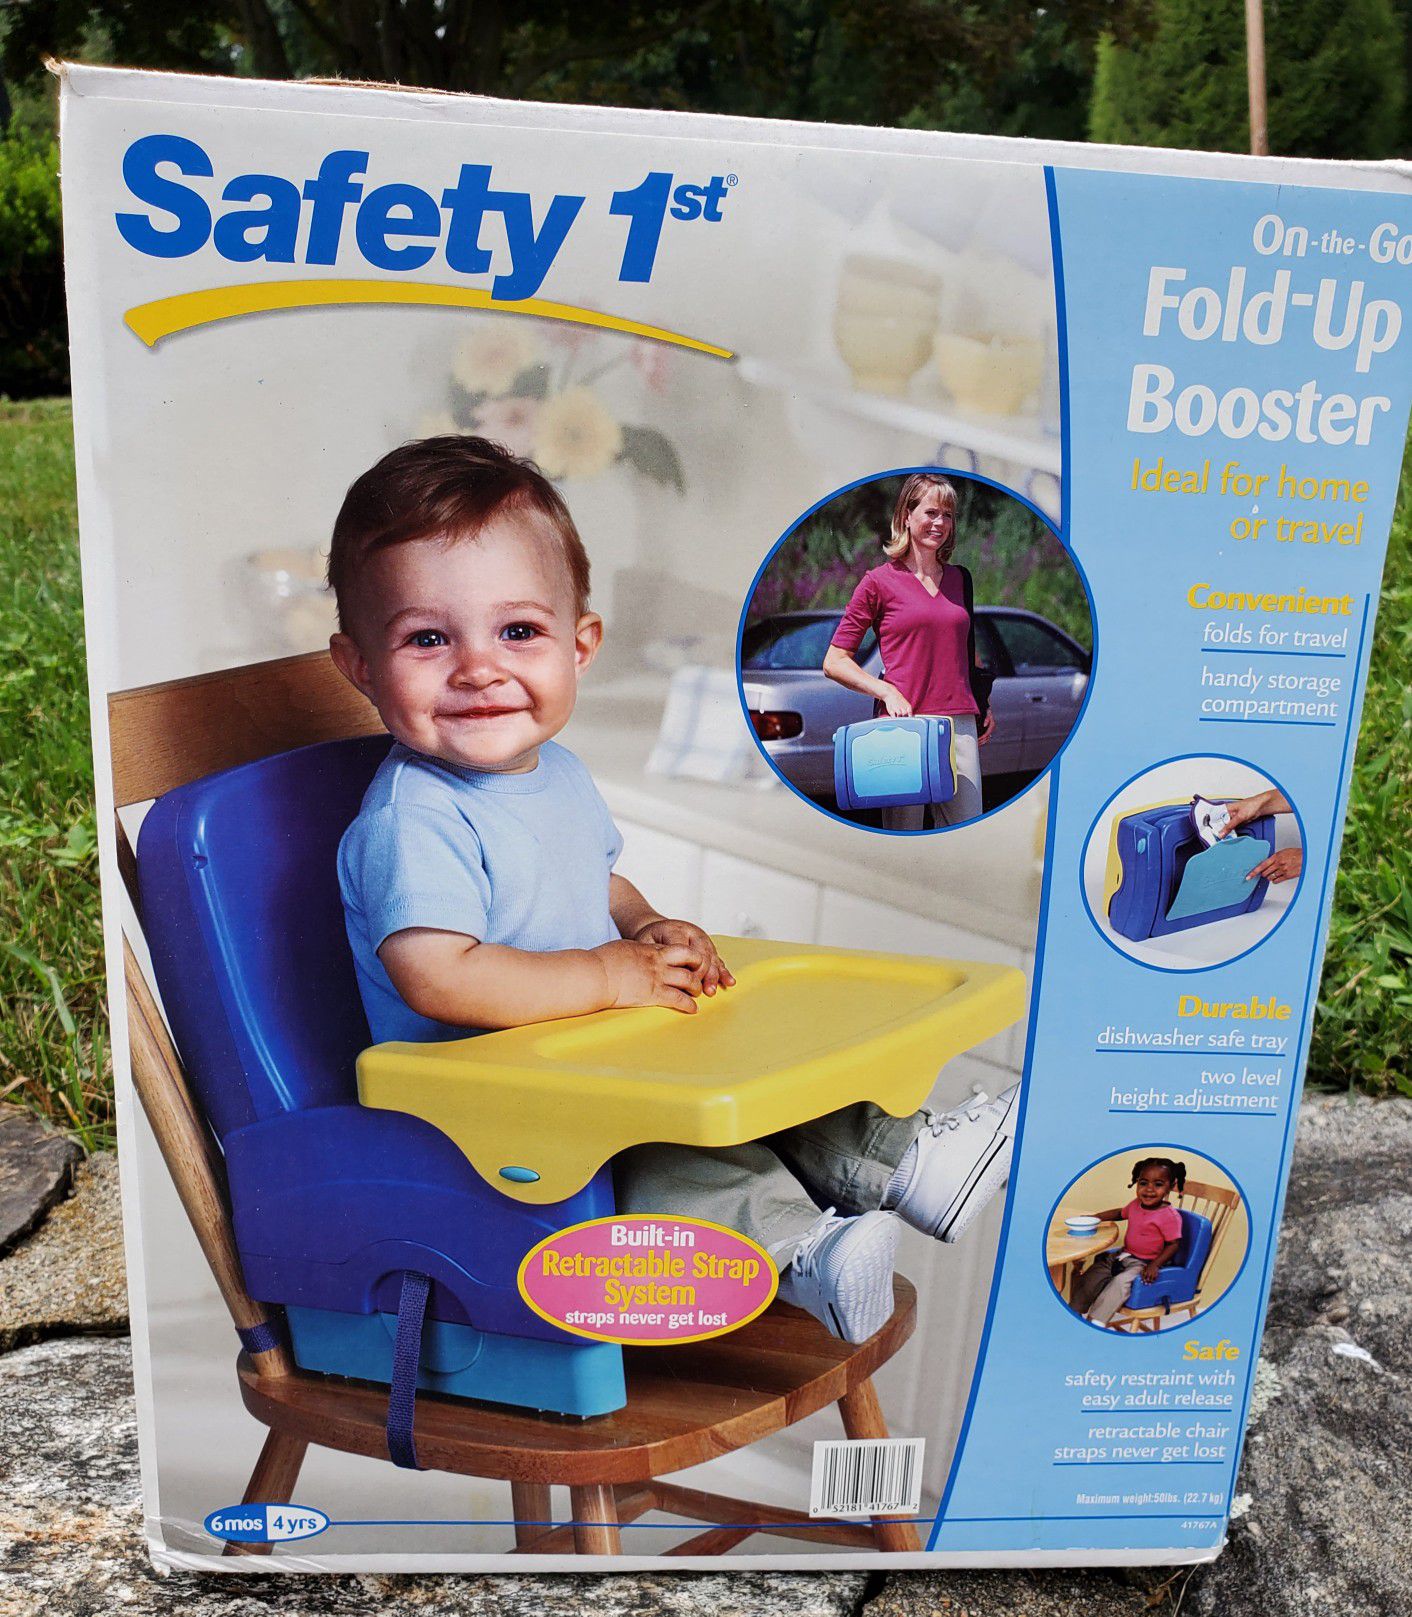 Safety 1st Fold Up Booster Seat with Tray Adjustable height Straps to a chair Safety straps for child Folds up for easy to carry along $12